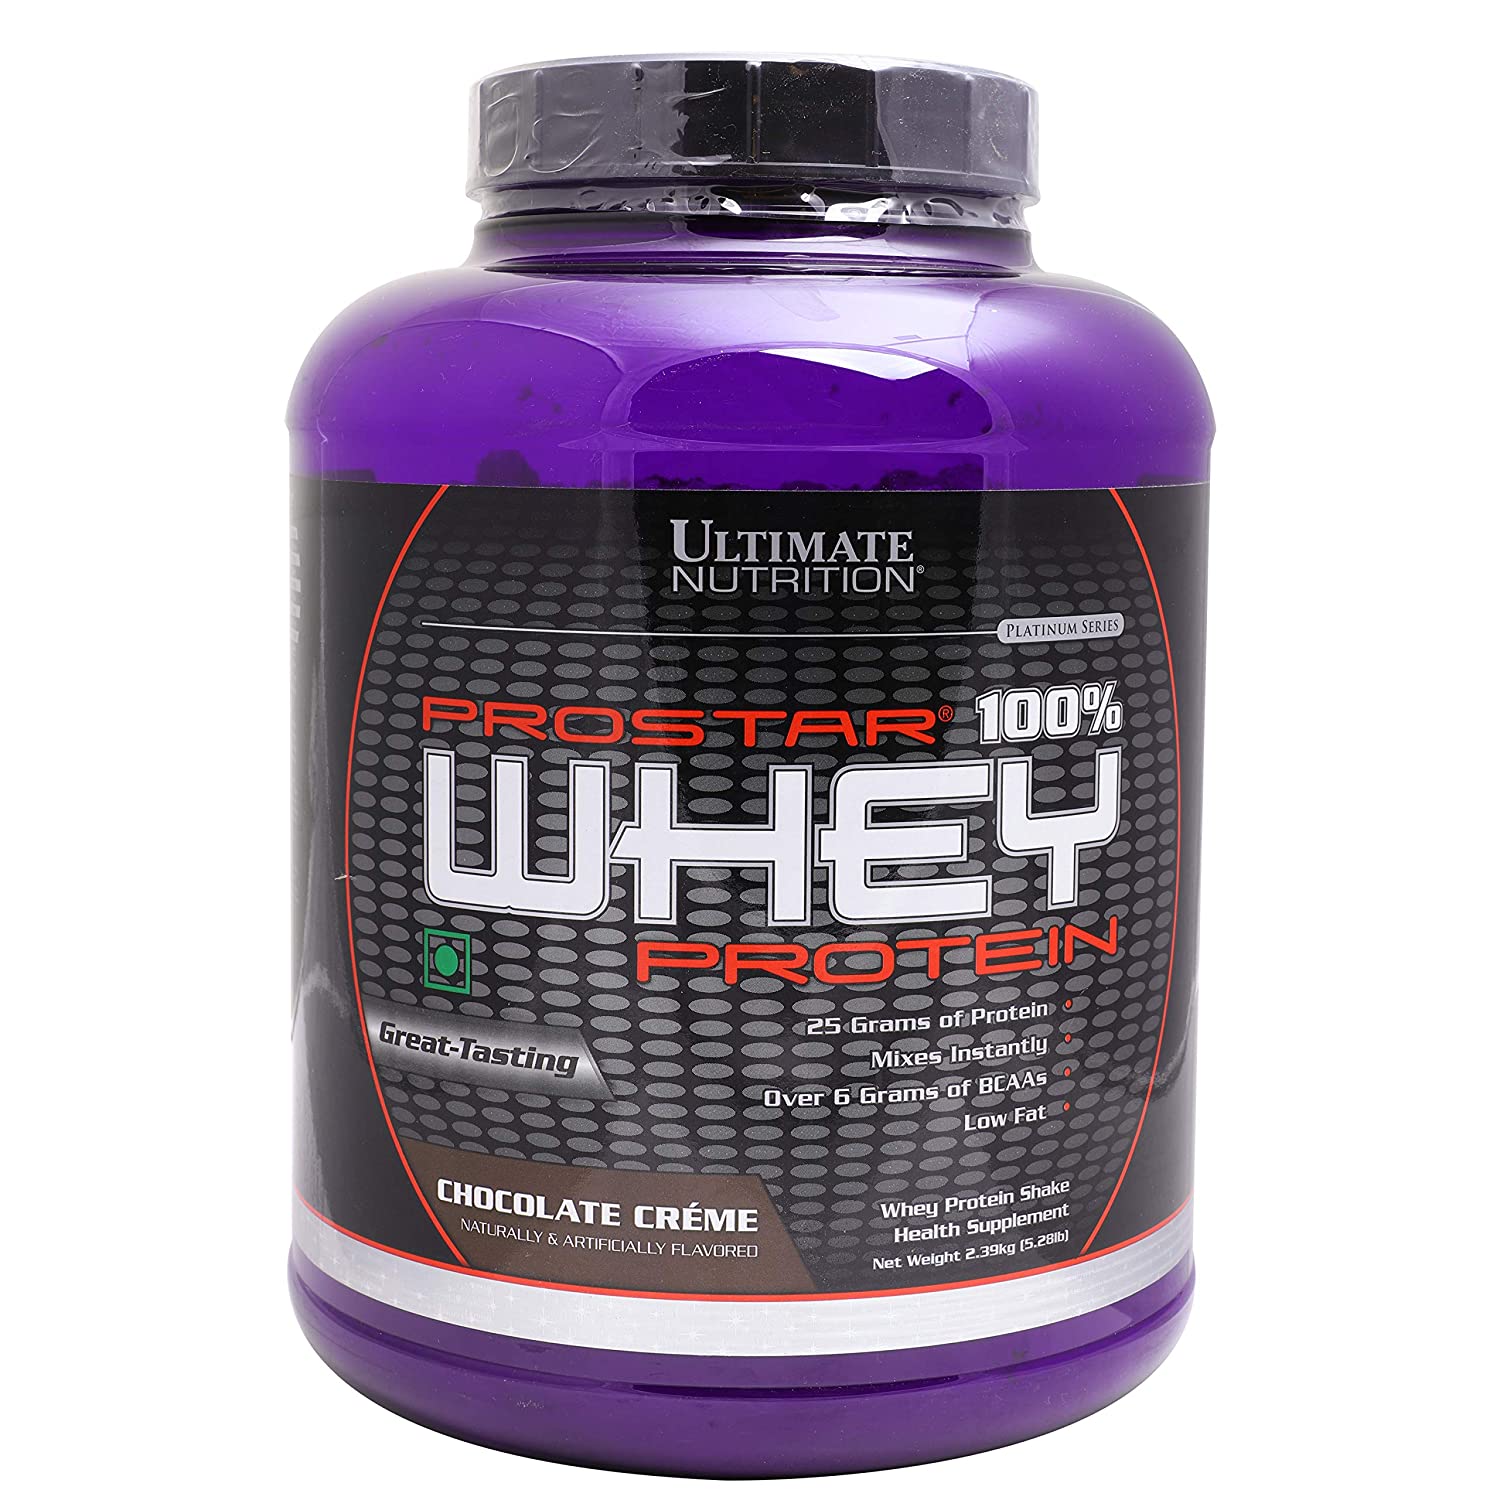 Image Of Ultimate Nutrition Prostar 100% Whey Beast Nutrition